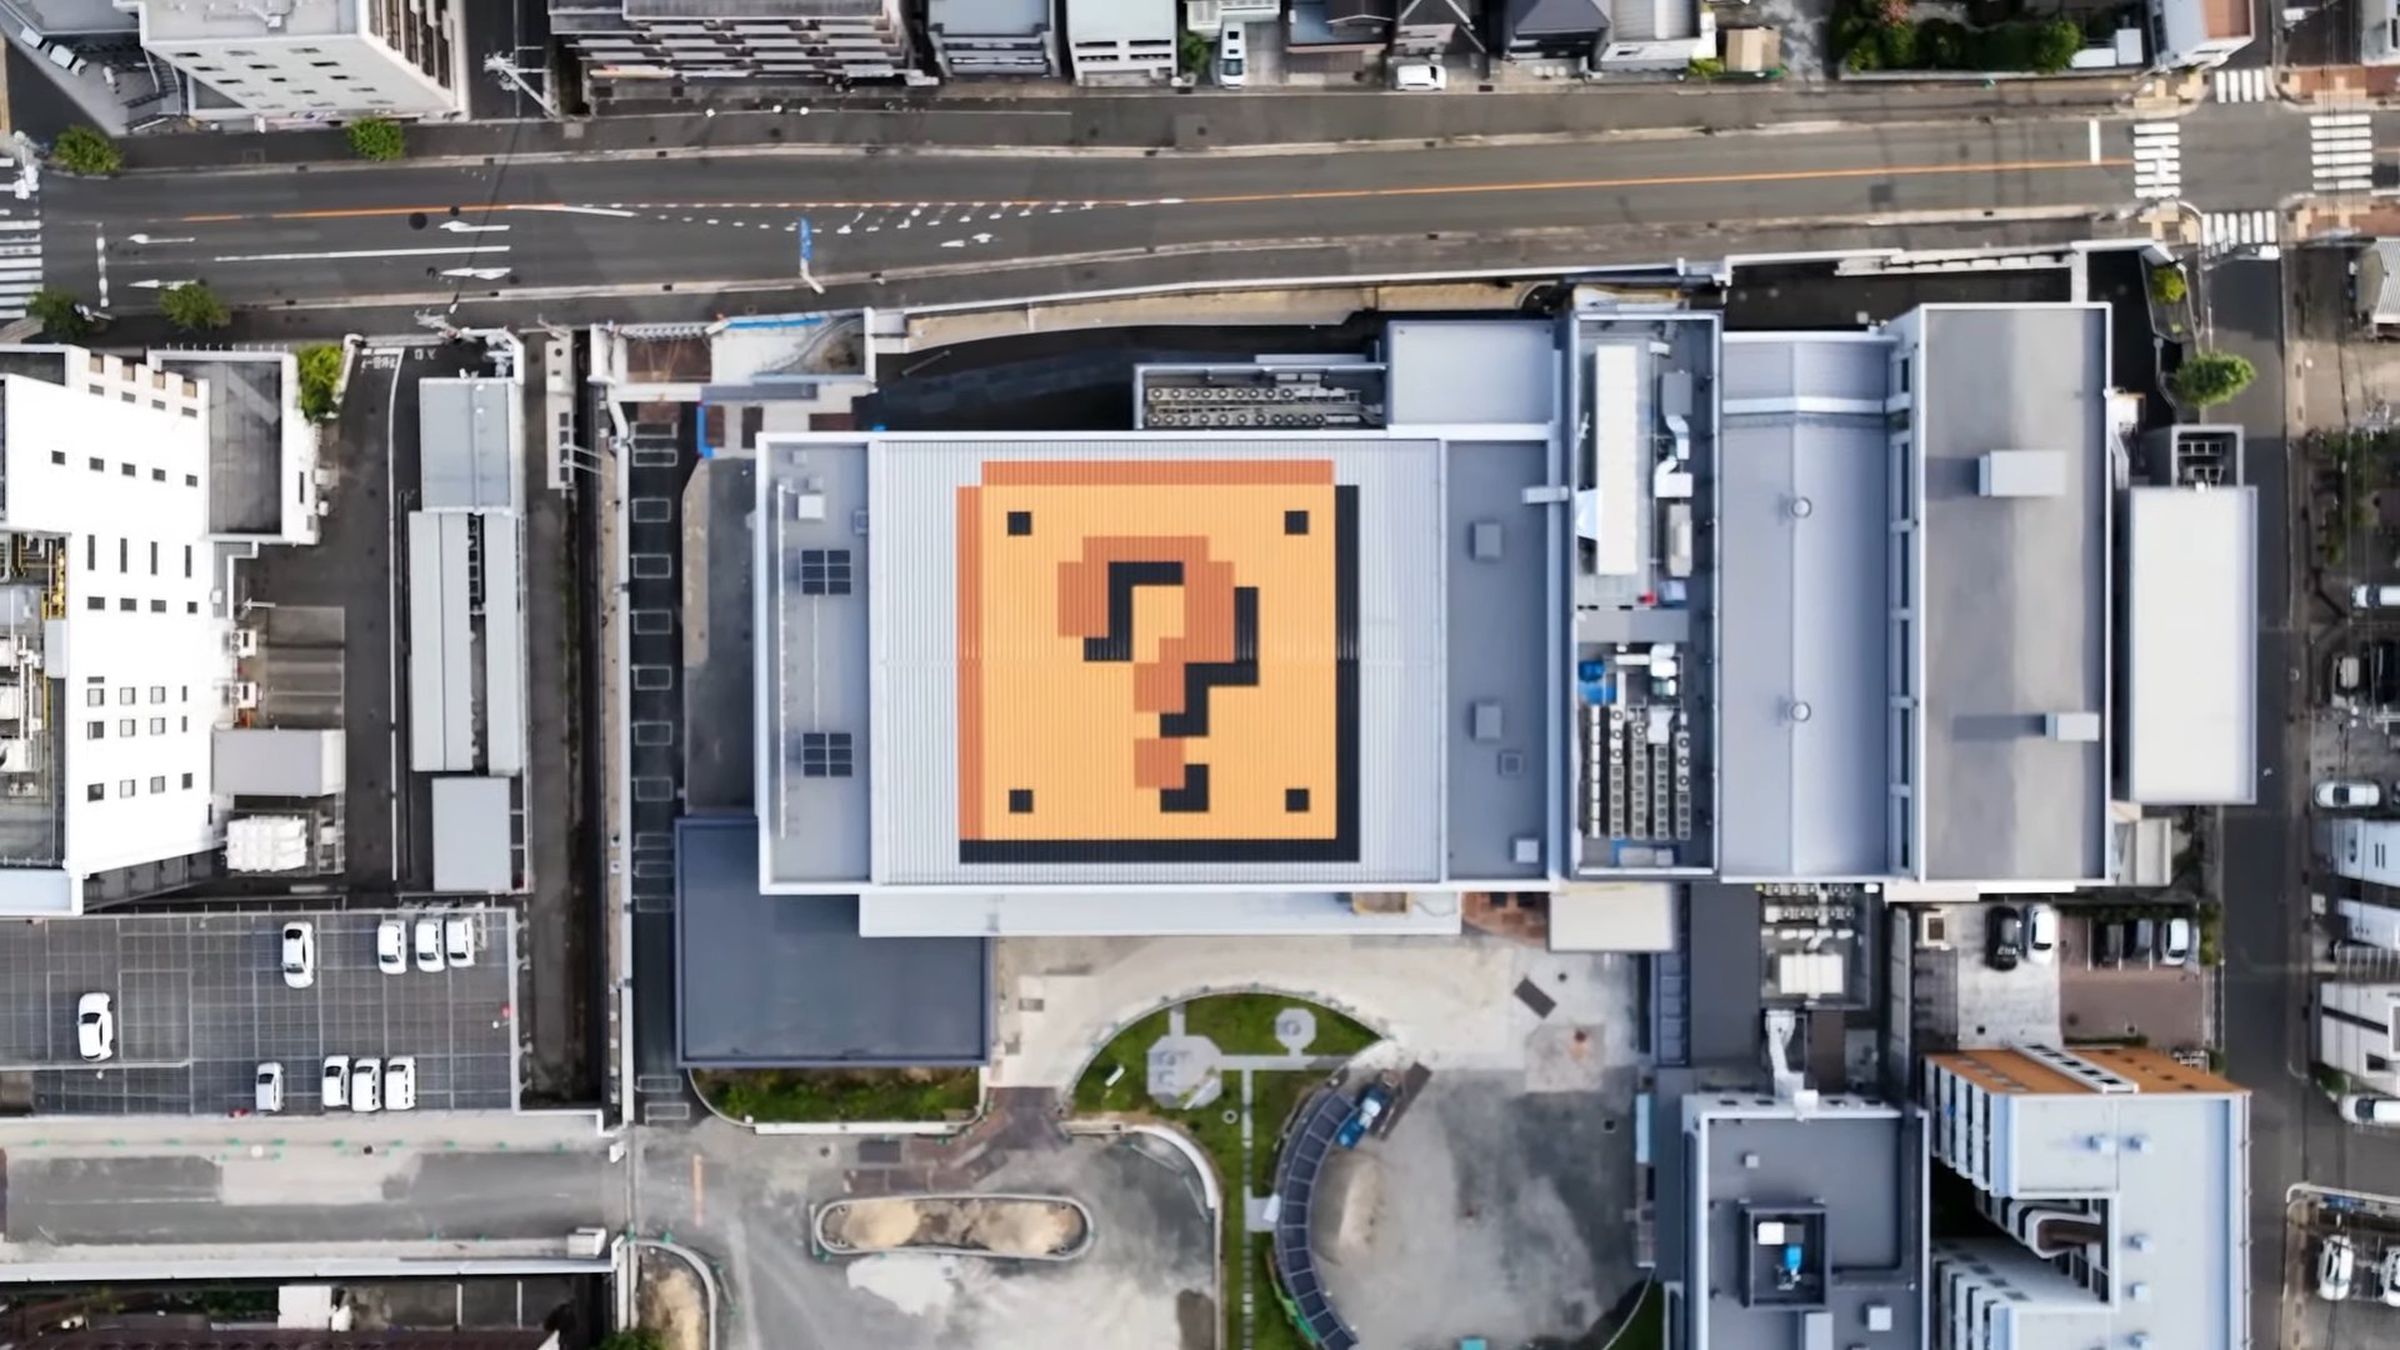 Aerial picture of the Nintendo Museum construction site, showing a building with one of the “question” blocks from Mario on the roof.